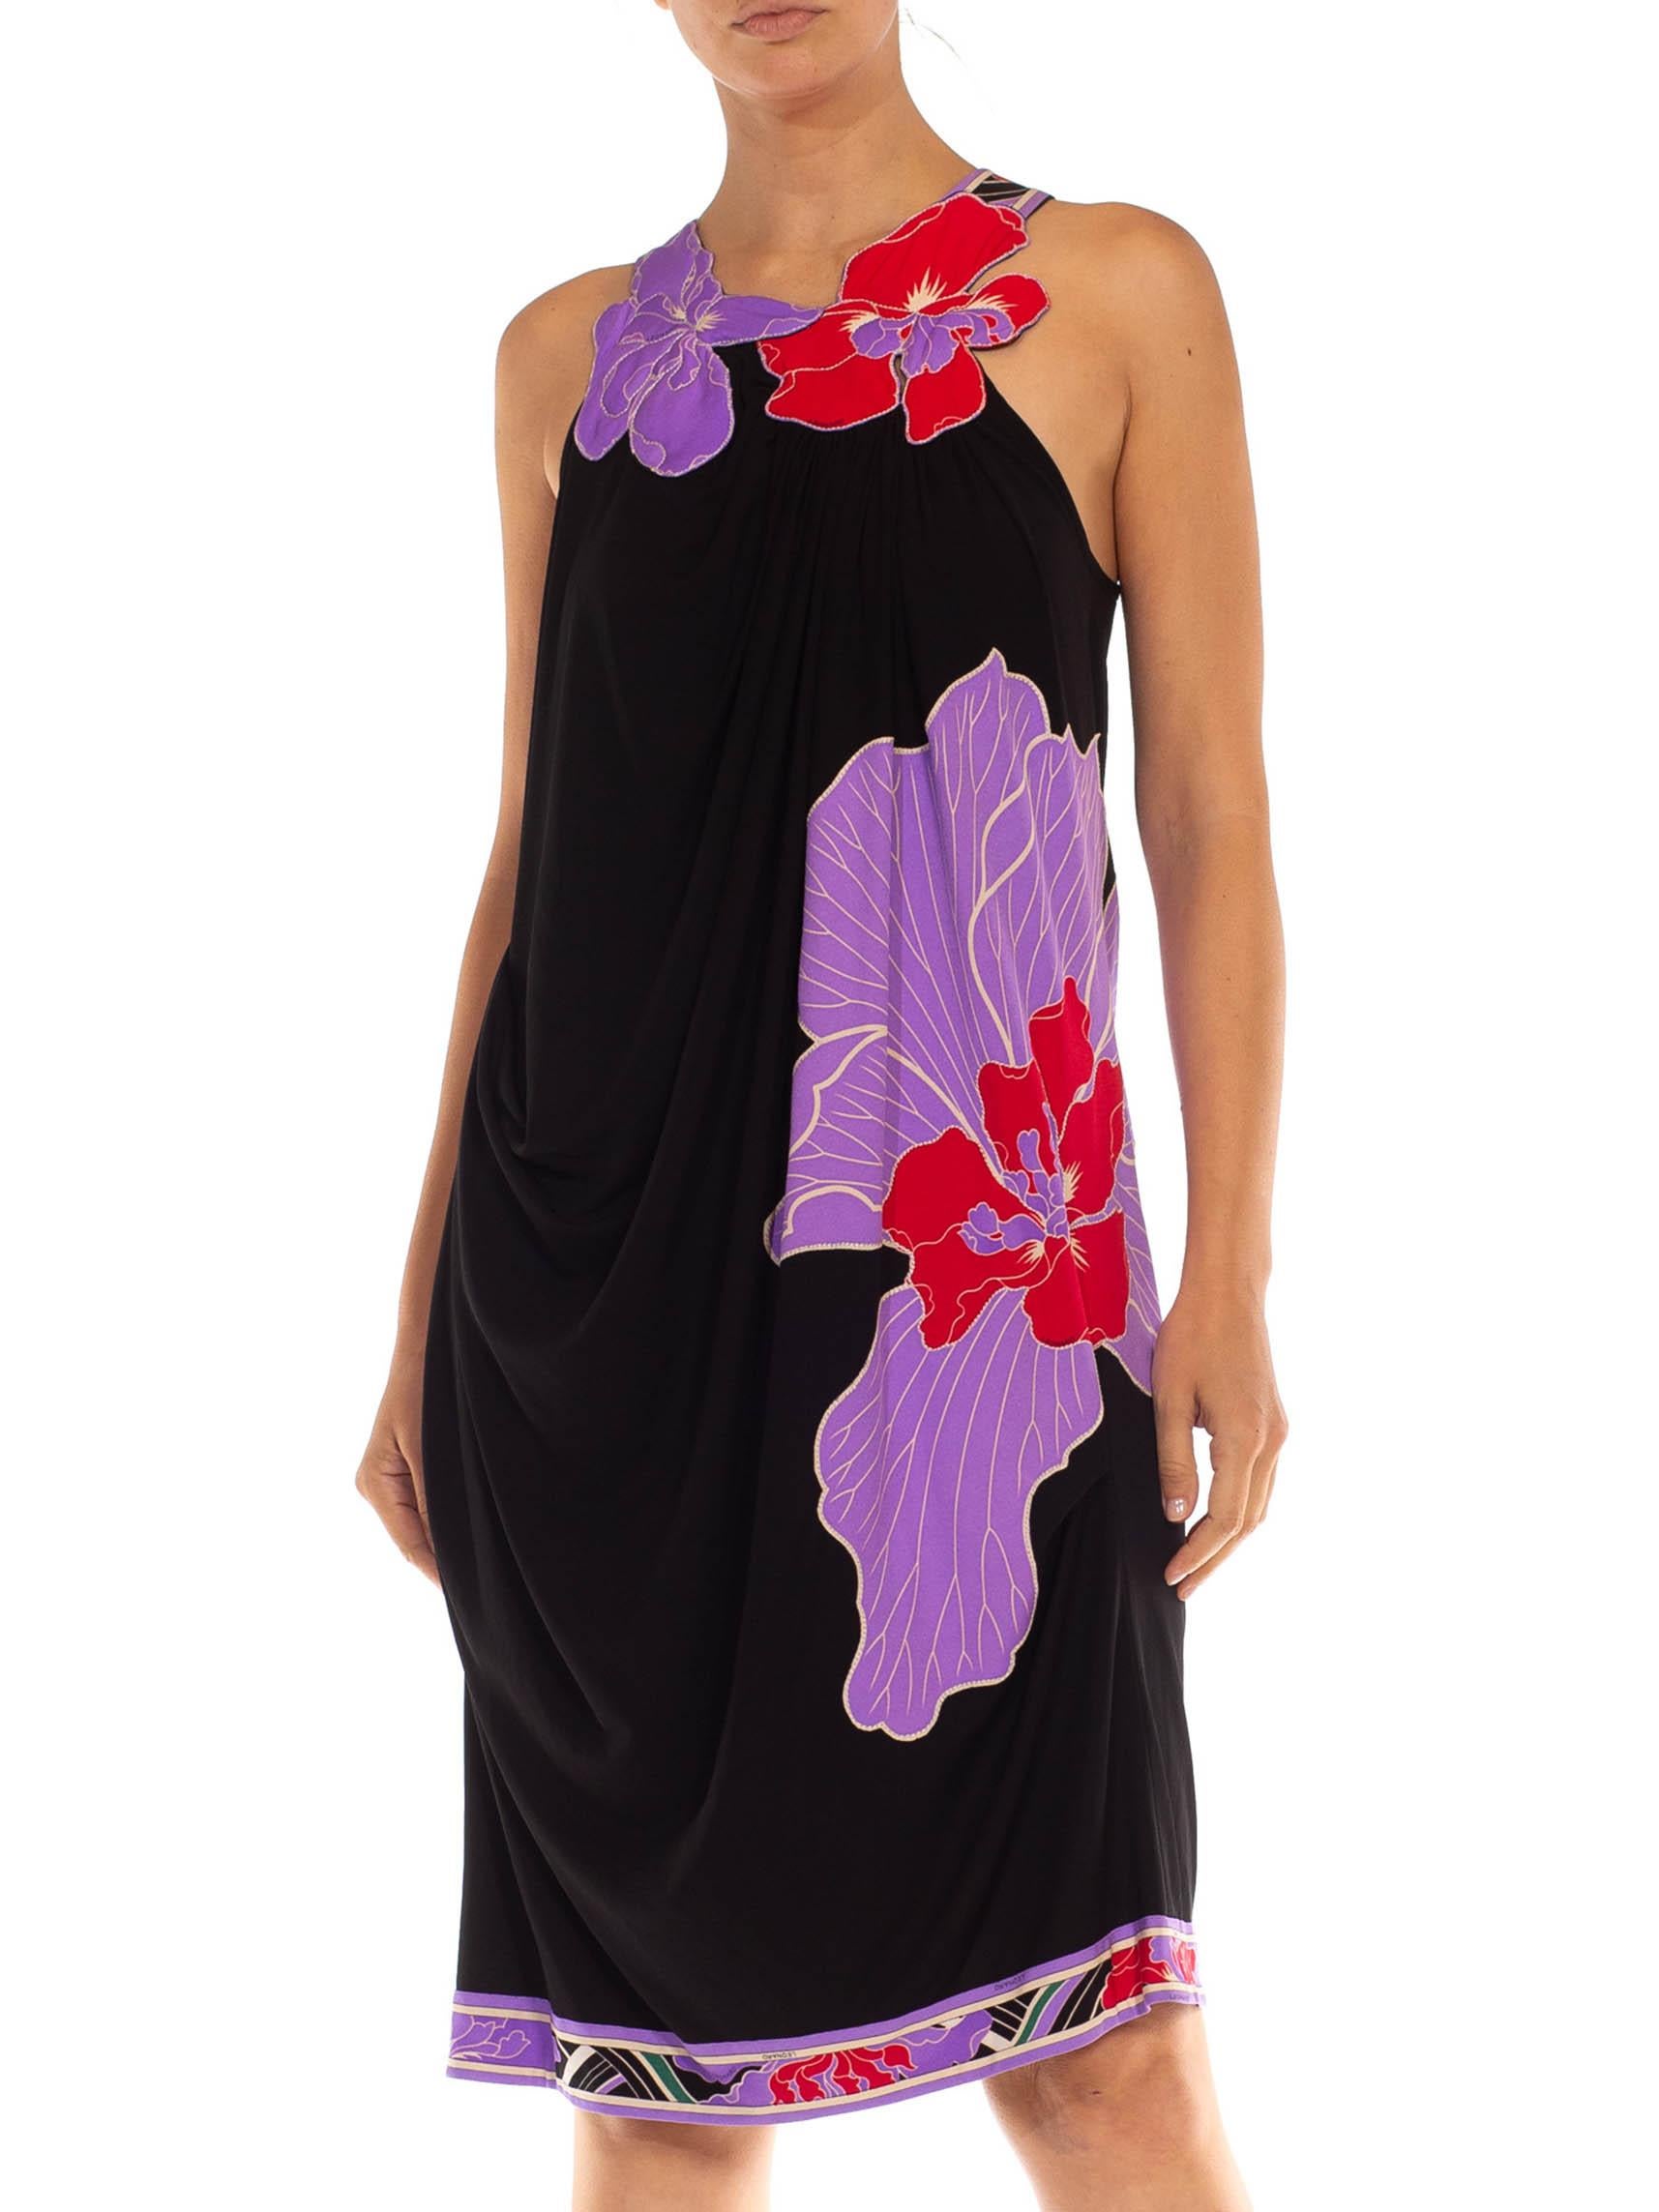 1990S LEONARD Black & Purple Jersey Sexy Draped Dress With Floral Appliqué Stra For Sale 1